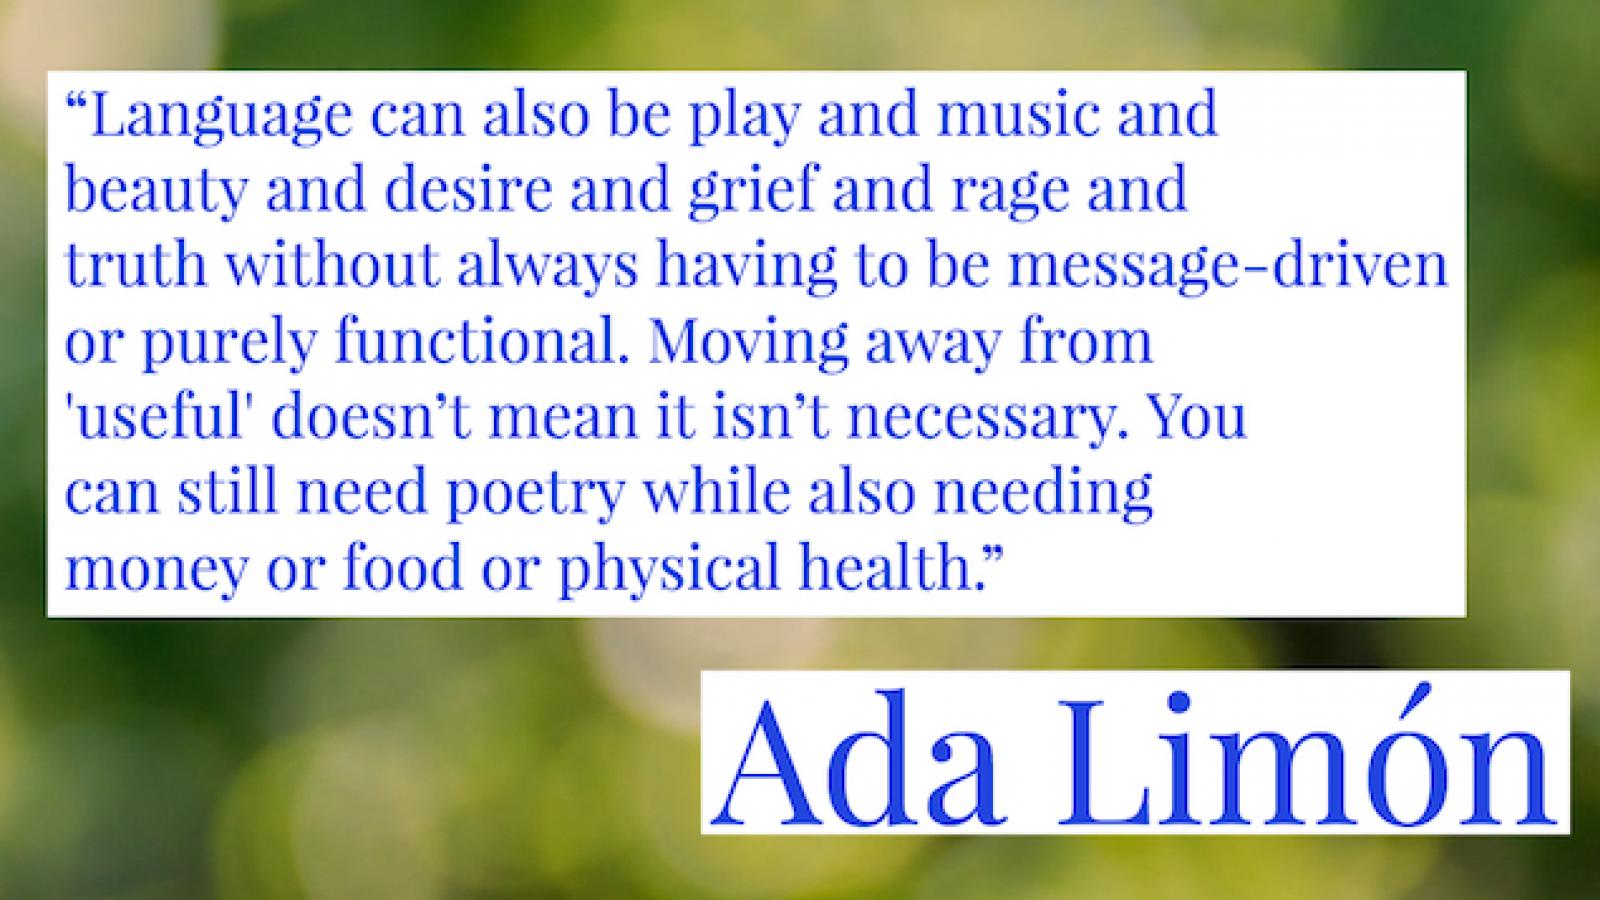 quote by Ada Limon